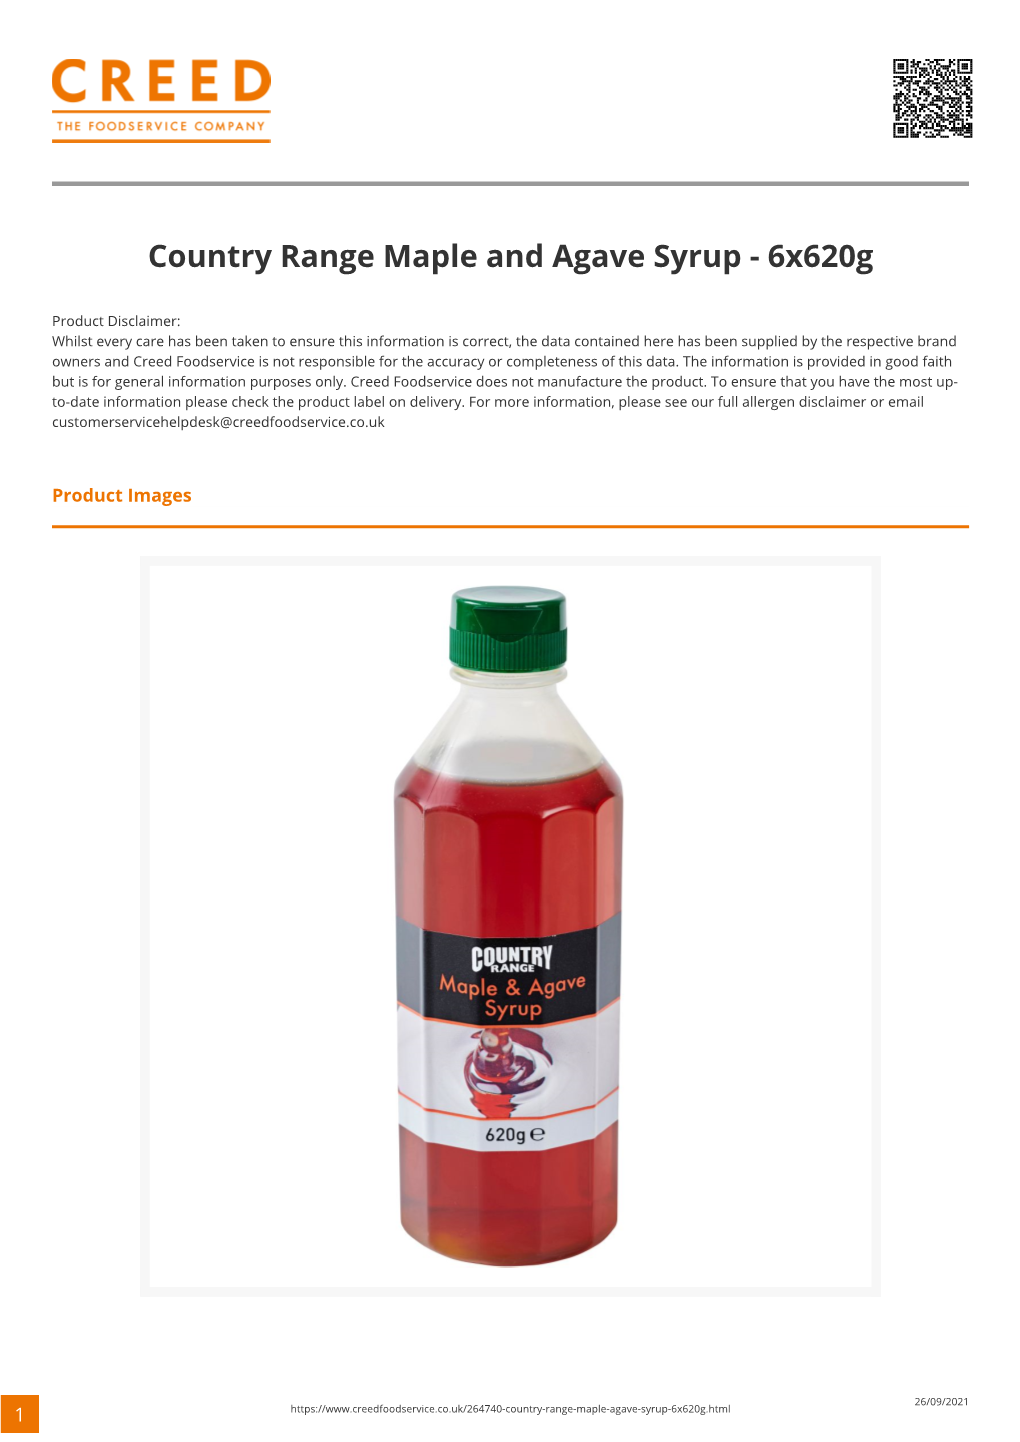 Country Range Maple and Agave Syrup - 6X620g